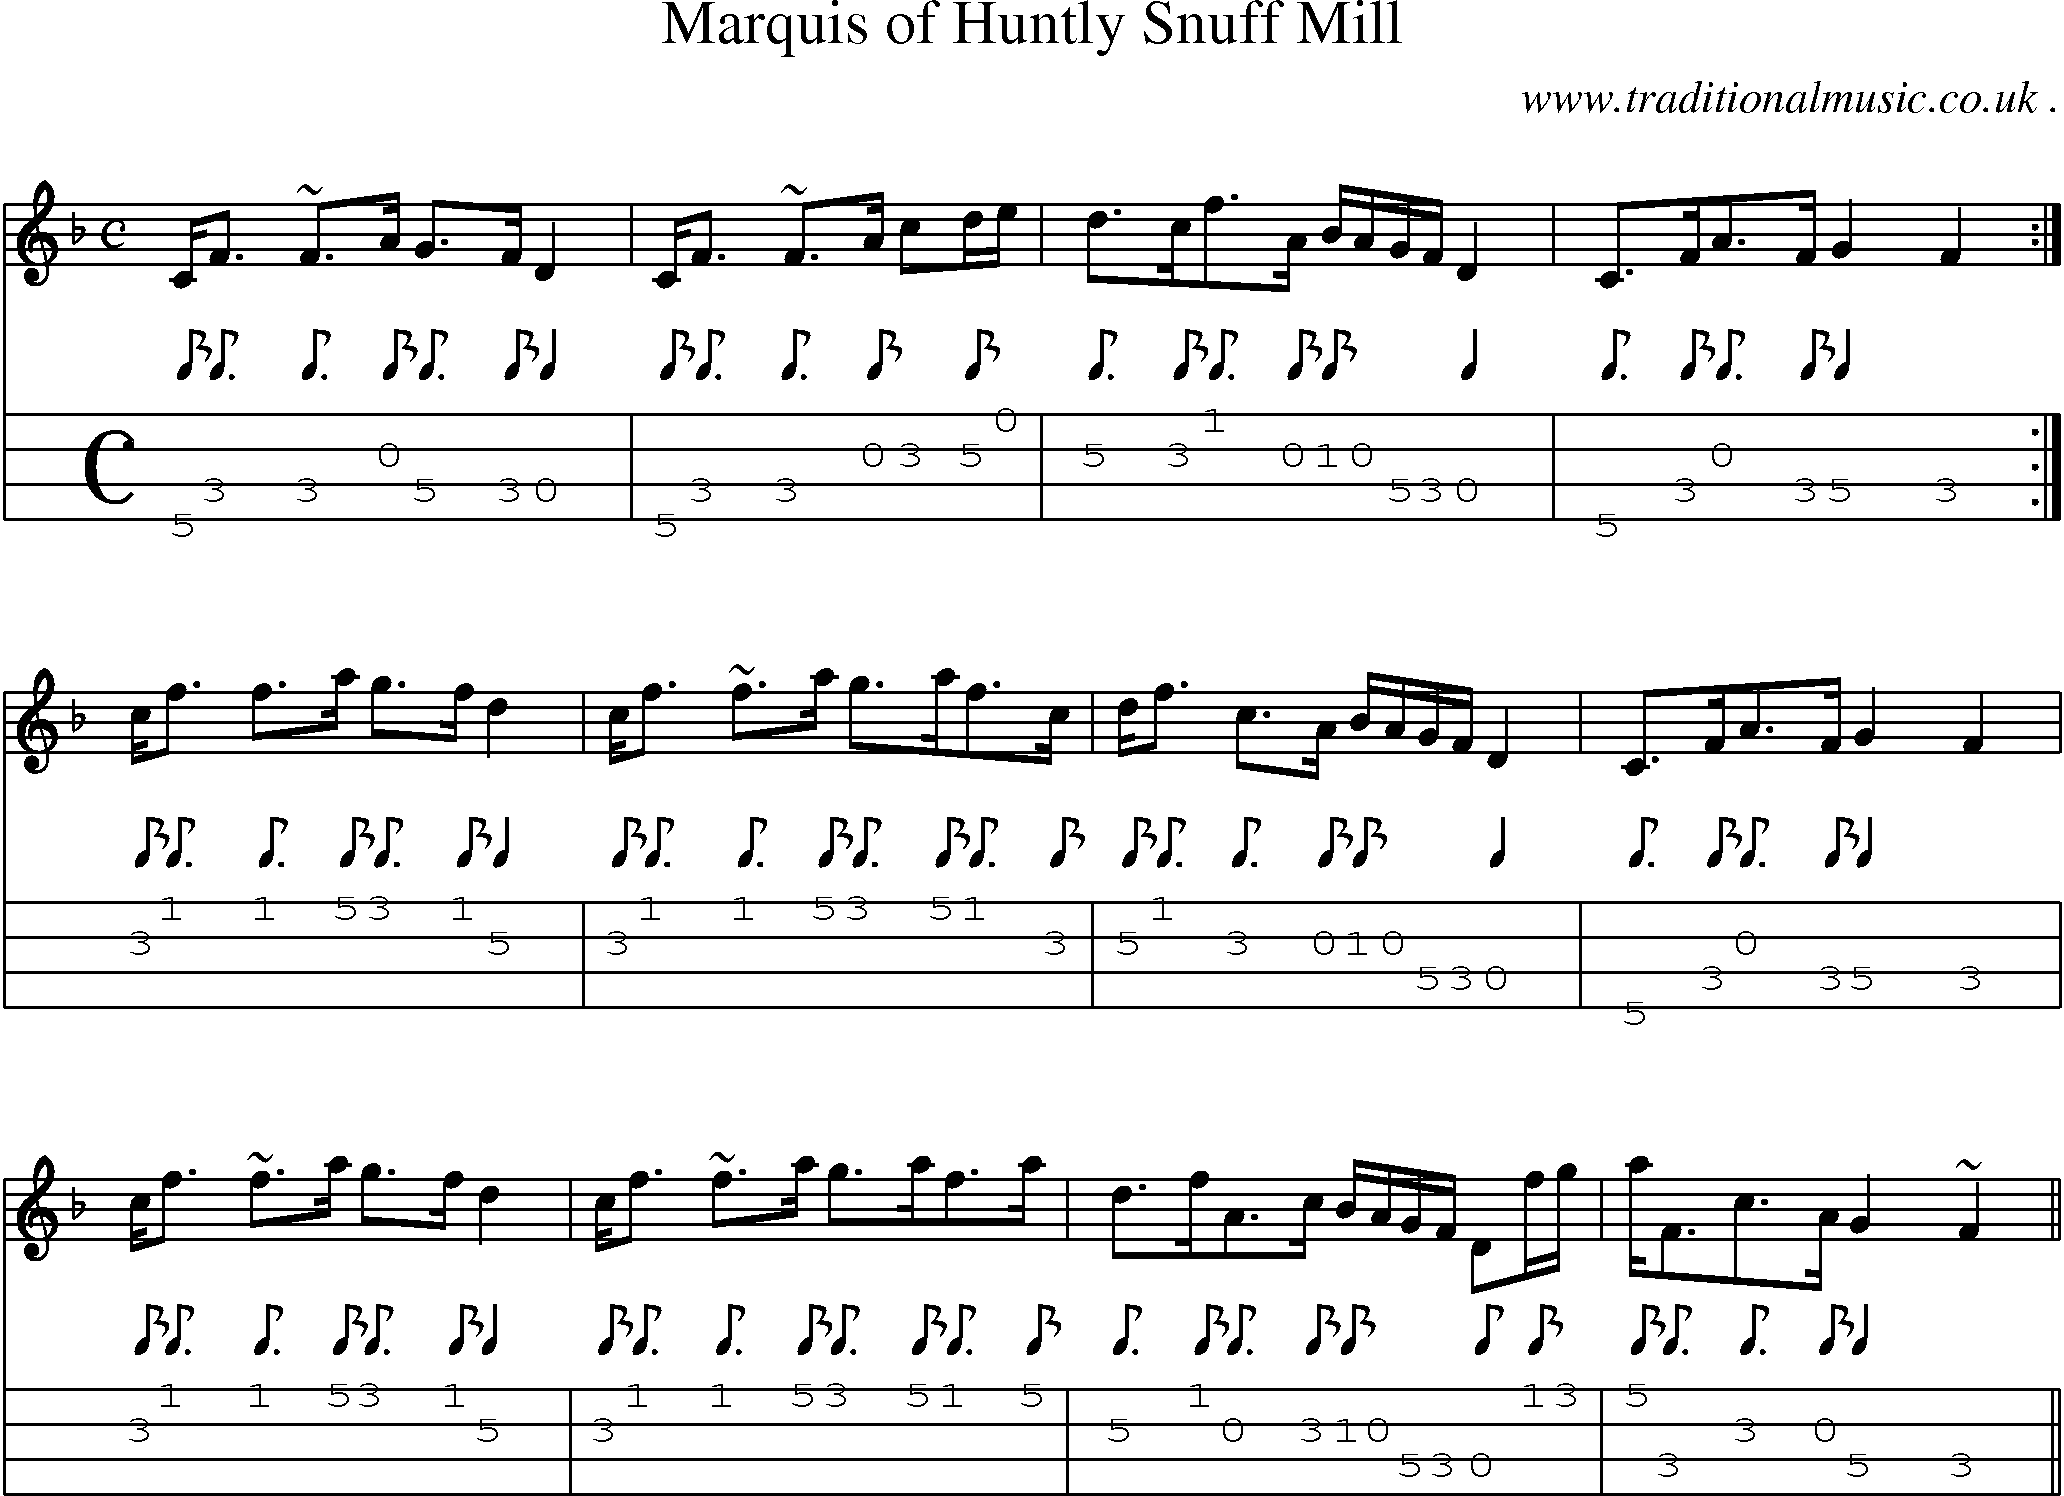 Sheet-music  score, Chords and Mandolin Tabs for Marquis Of Huntly Snuff Mill